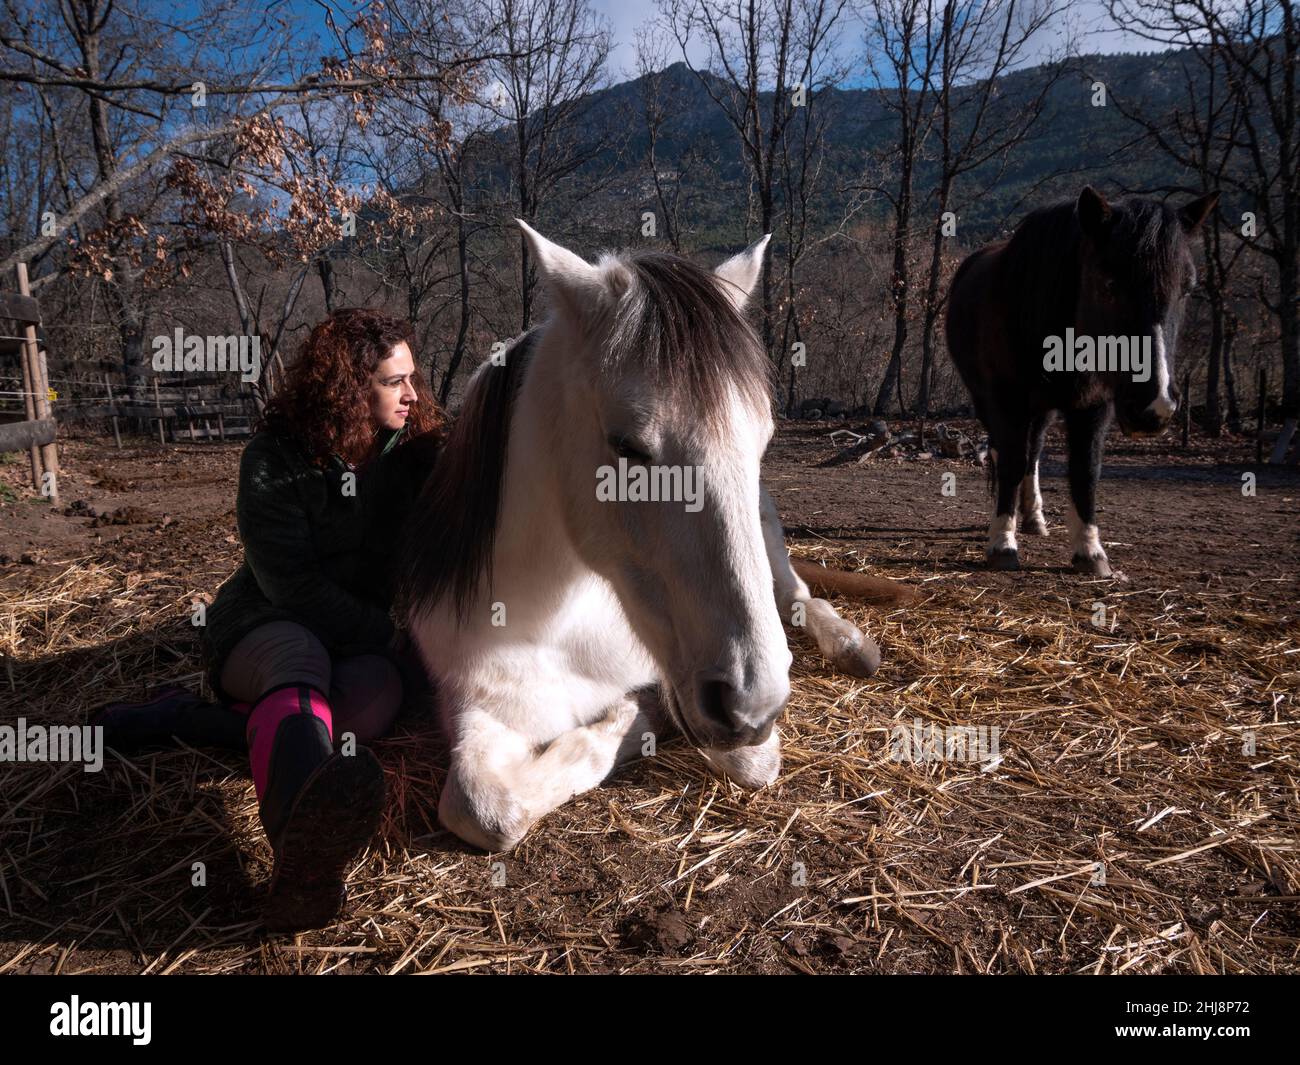 Side view of female in green polar fleece jacket sitting by the side of a white pony with other black pony in the background. Stock Photo